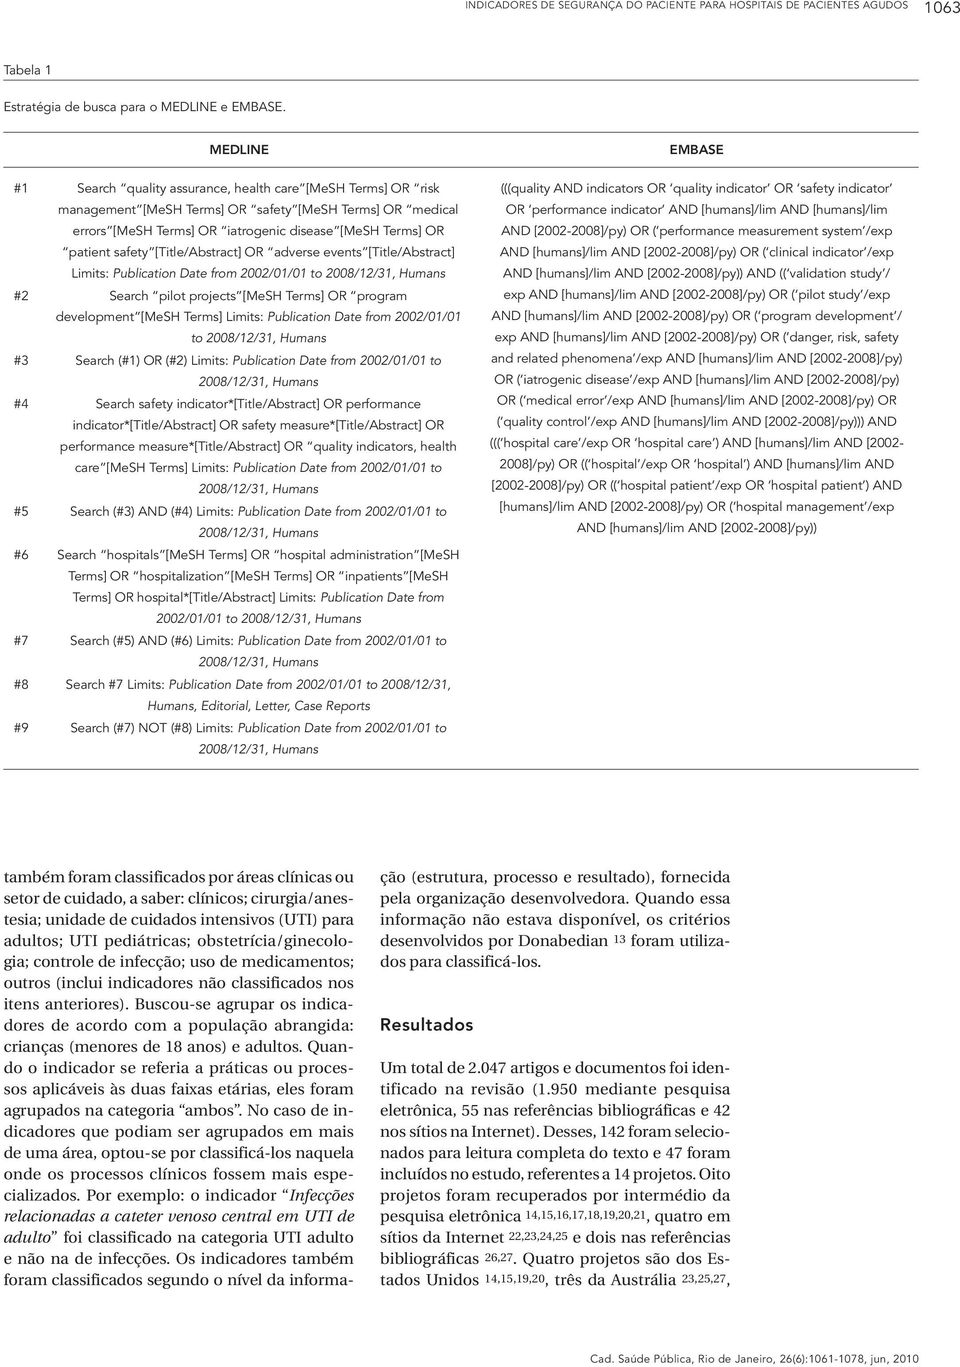 safety [Title/Abstract] OR adverse events [Title/Abstract] Limits: Publication Date from 2002/01/01 to 2008/12/31, Humans #2 Search pilot projects [MeSH Terms] OR program development [MeSH Terms]